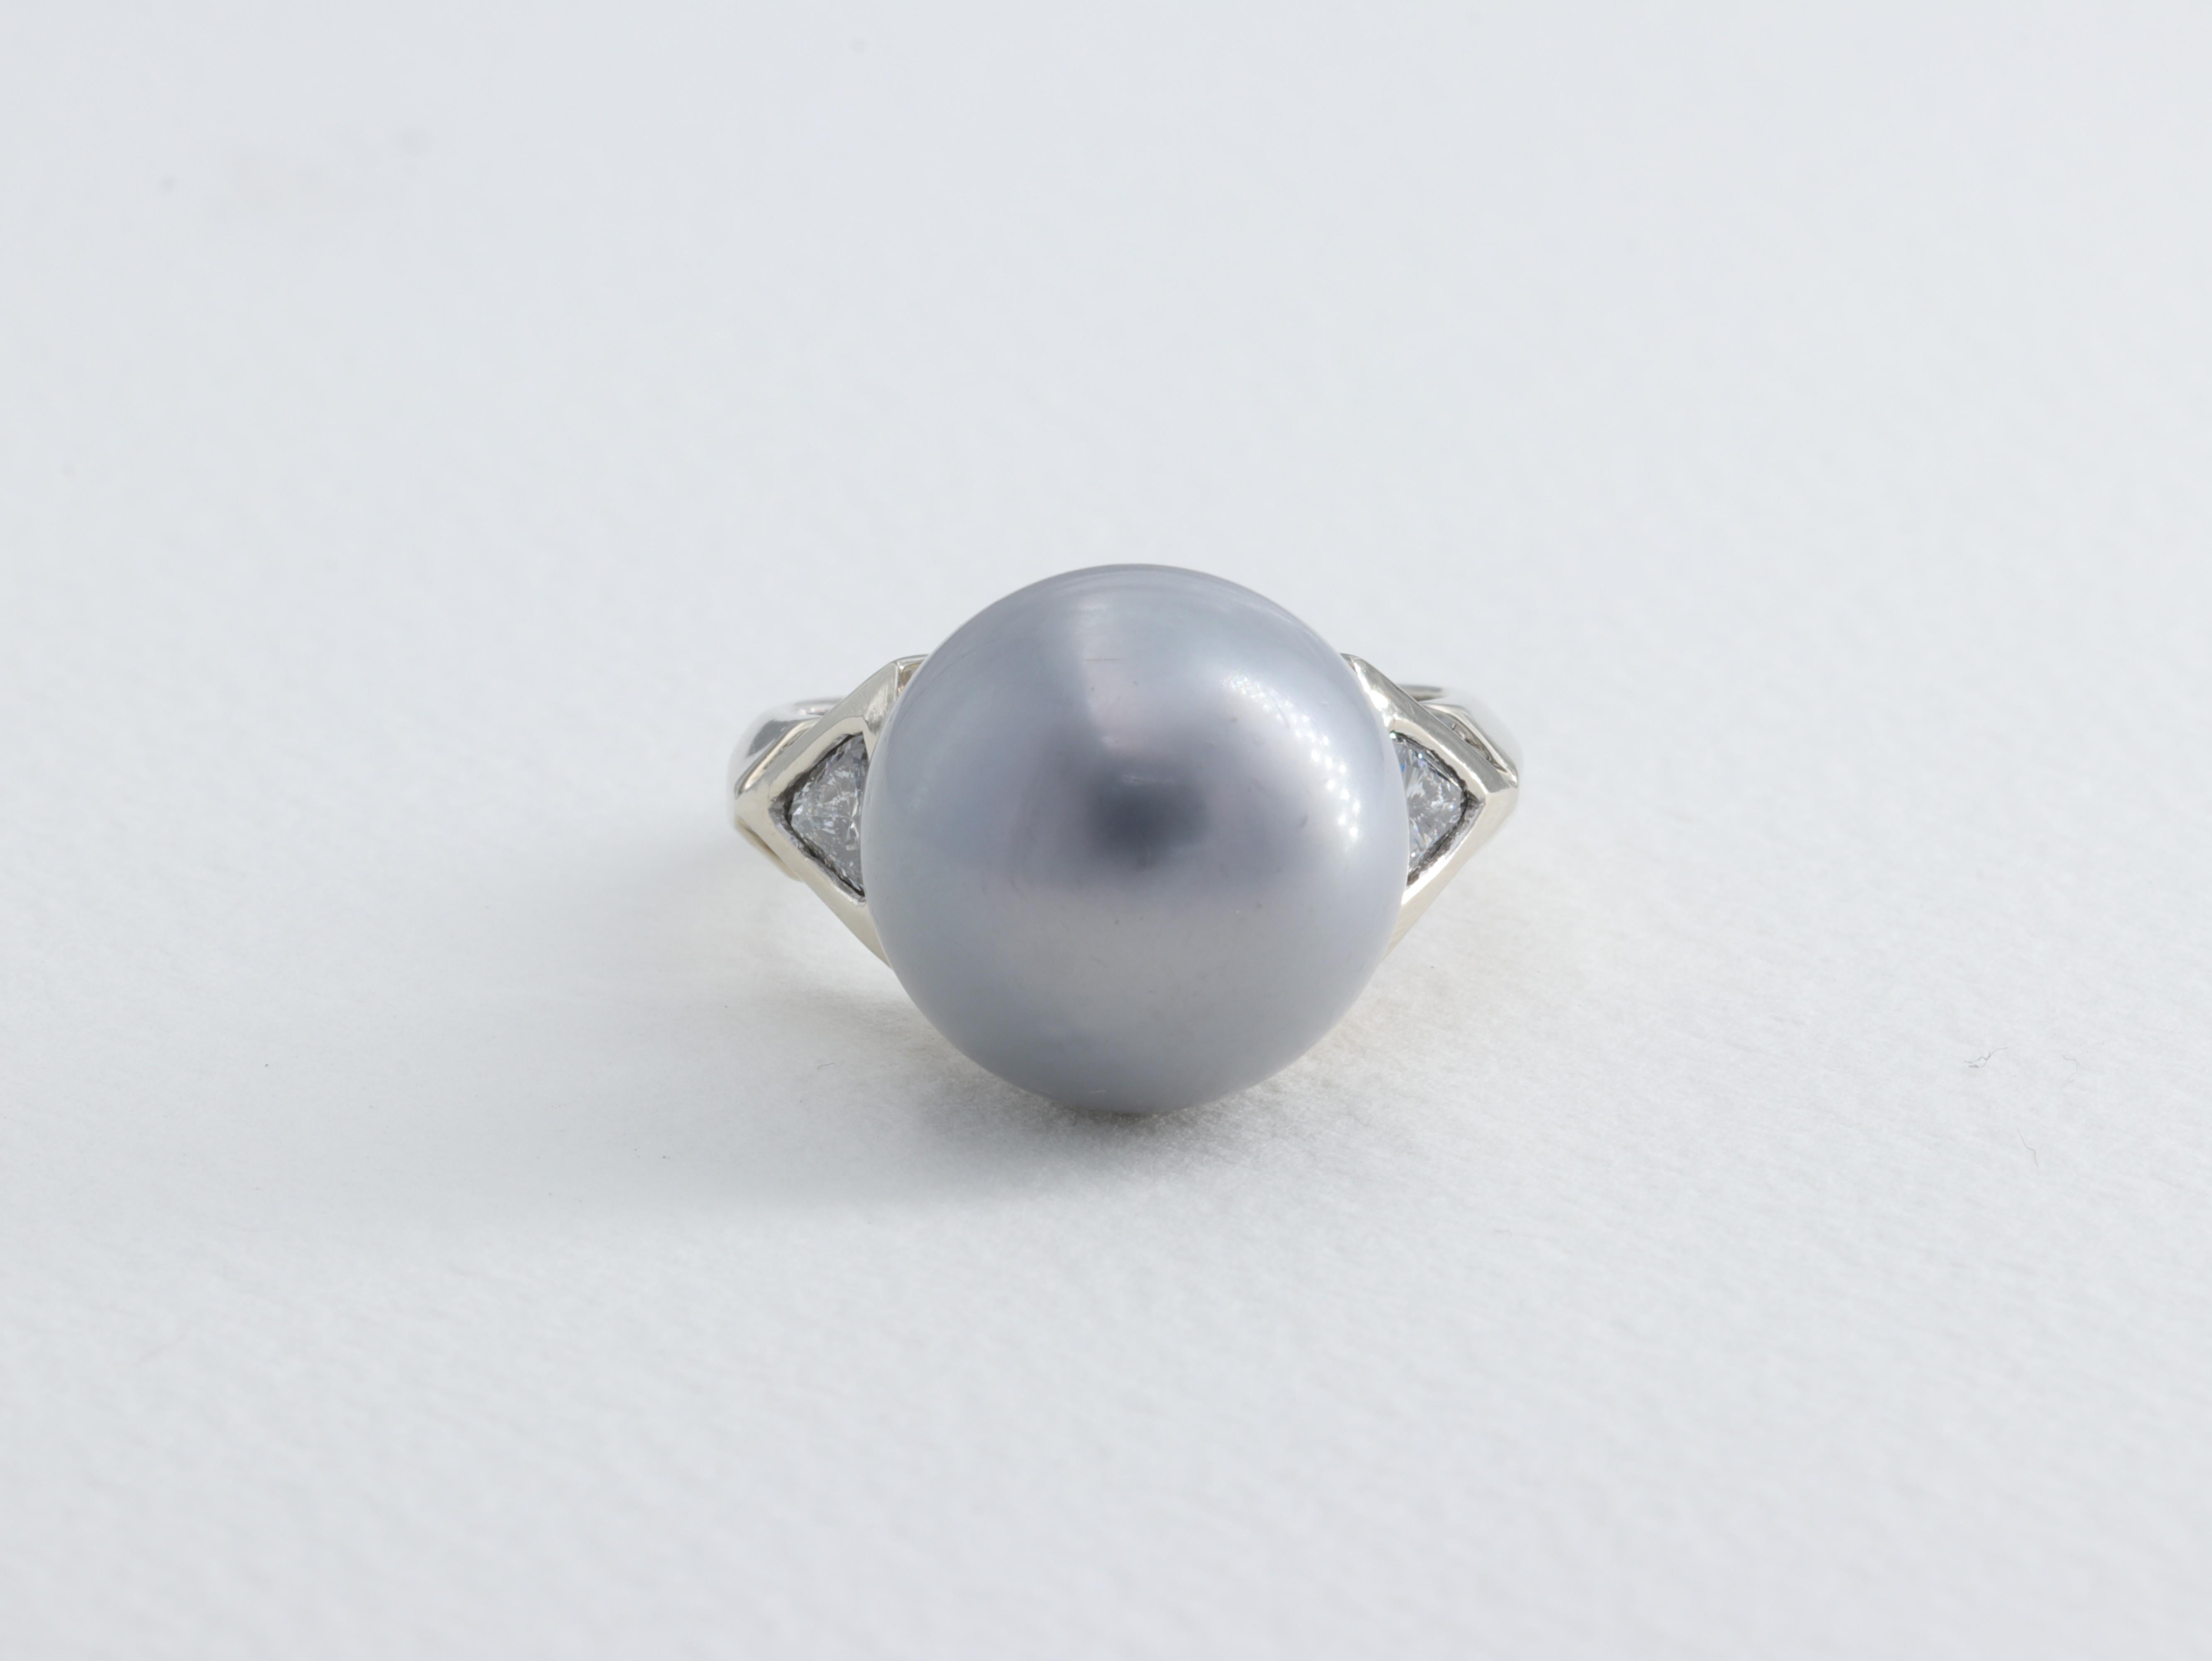 14 MM Silver Tahitian Pearl and Trillion Diamond 3 Stone Ring in 14 Karat White Gold

Pearl:

Measurement - 14mm 
Color - Silver Grey 
Quality - Very Good Minimal Blemishes 

Diamonds:

Weight - Approximately 0.80 carats
Color - G-H
Clarity - SI1-